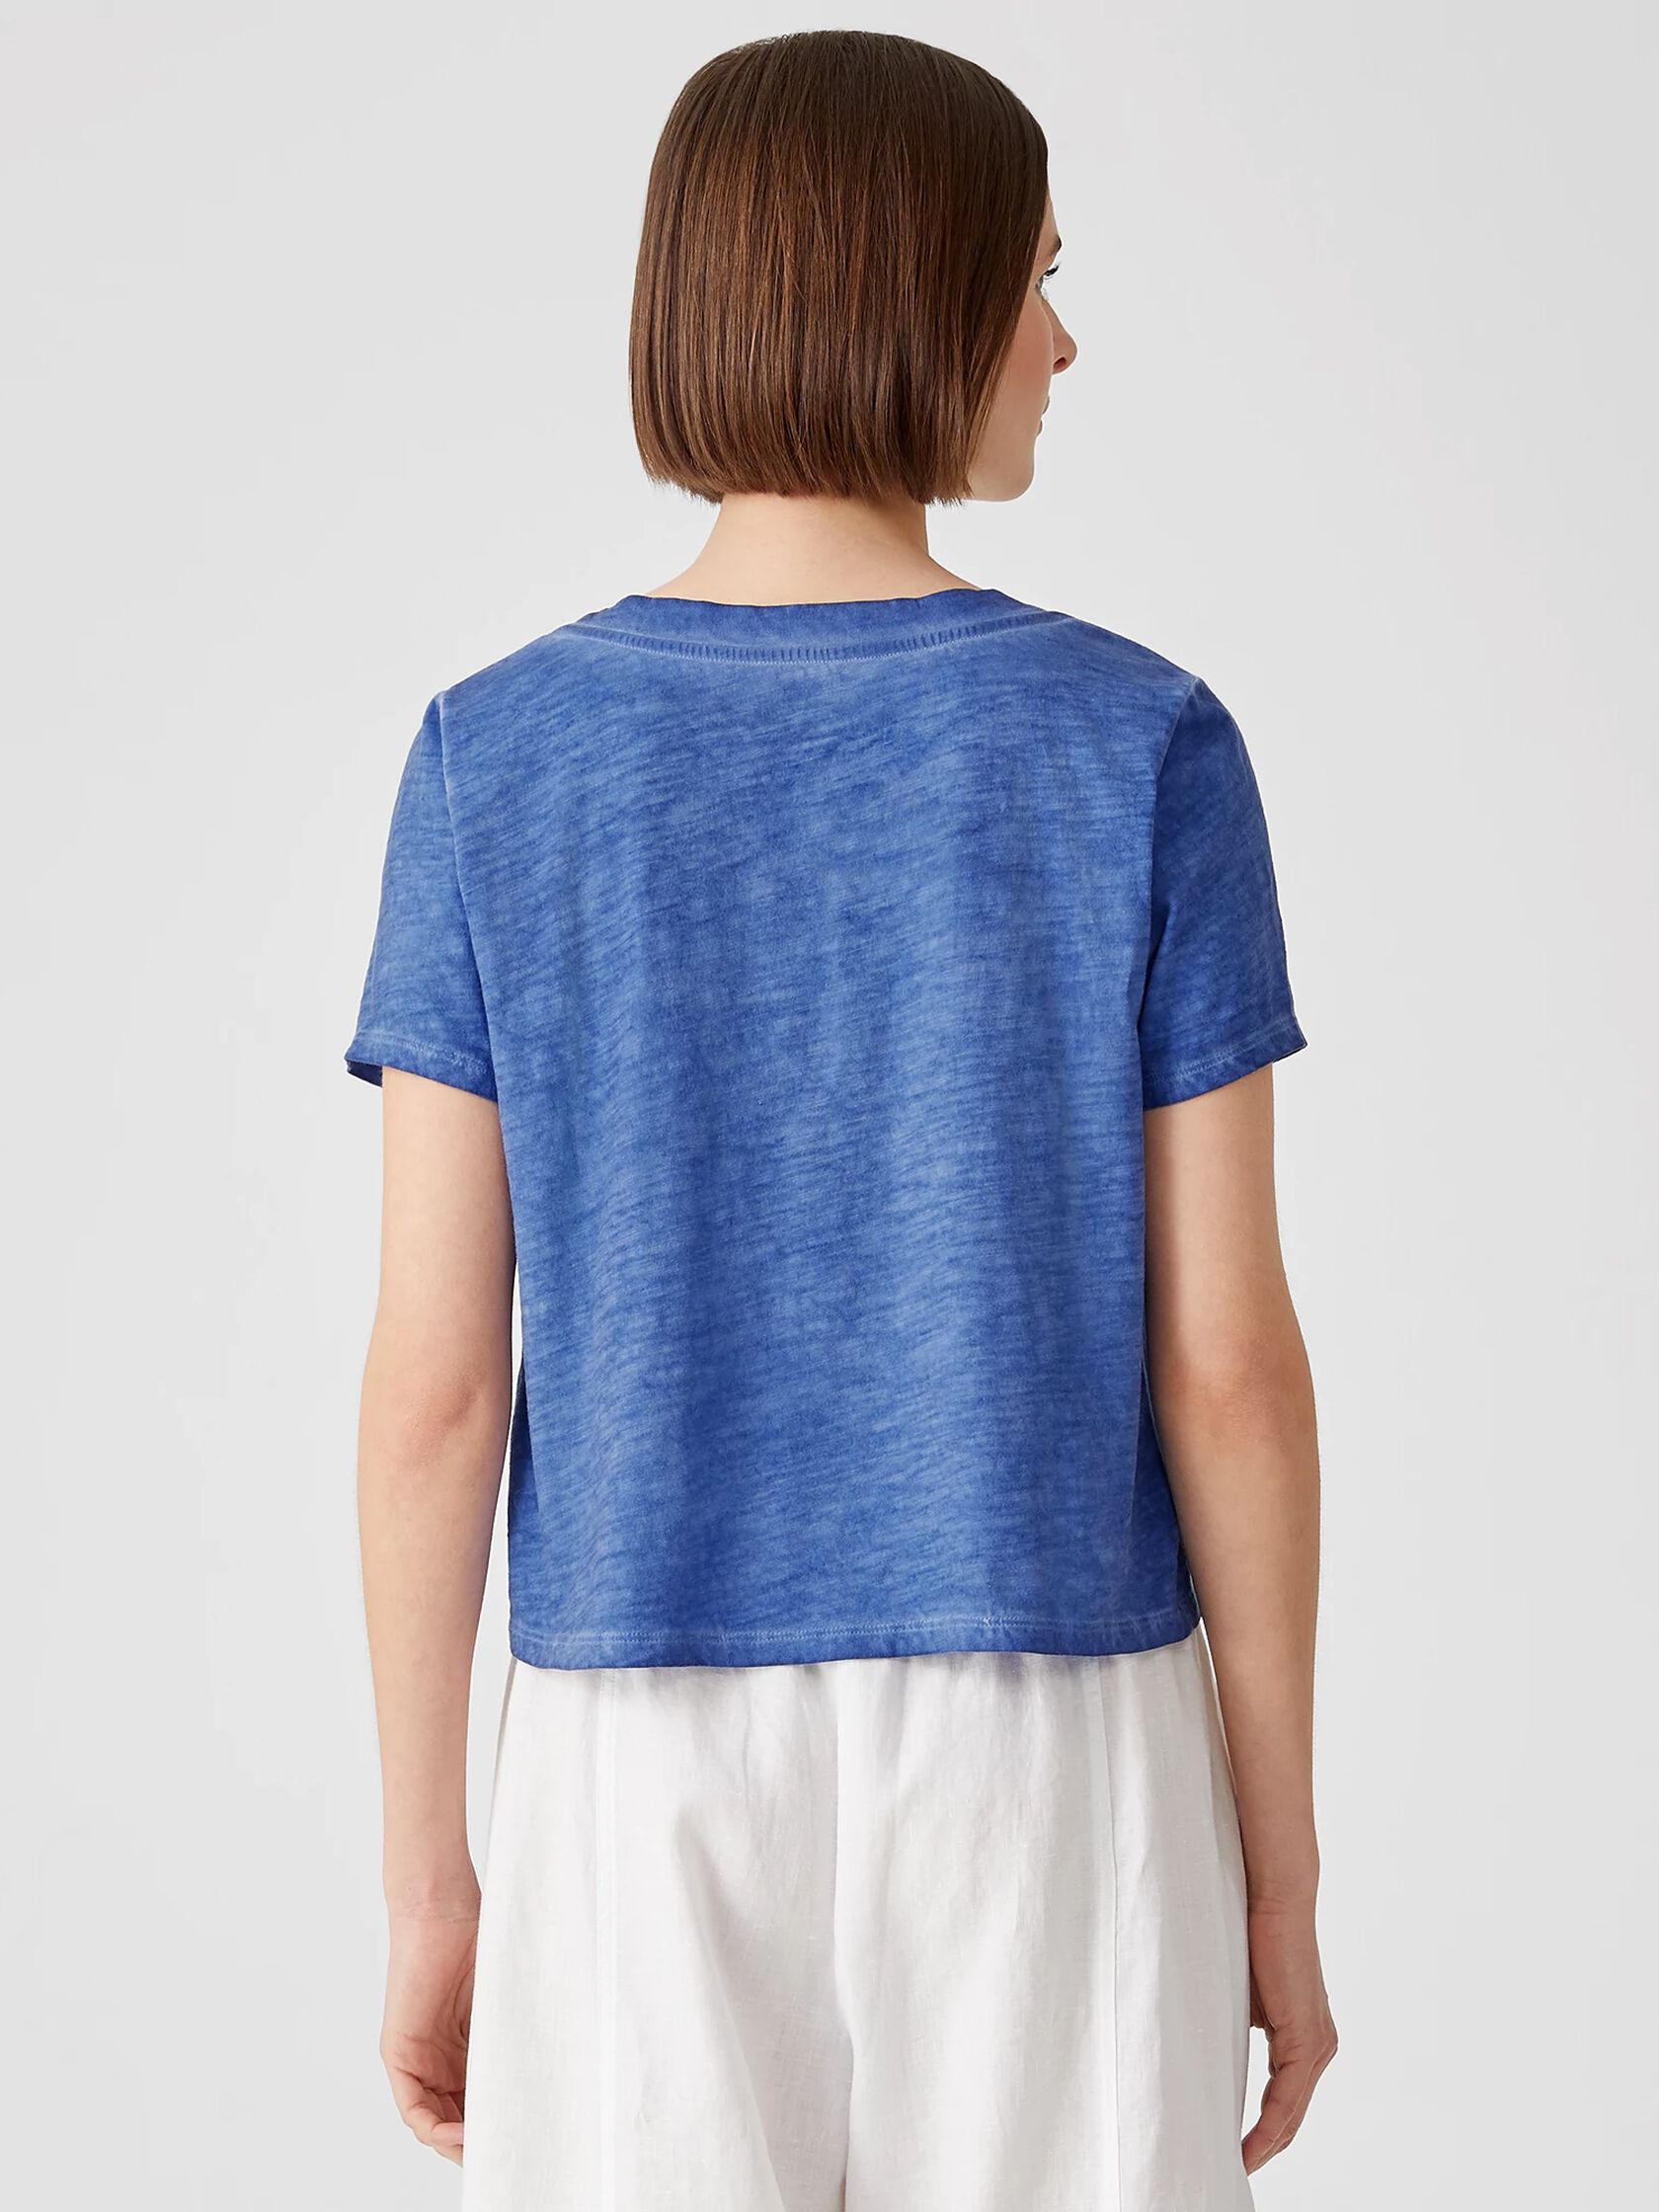 Pigment-Dyed Organic Cotton V-Neck Tee | EILEEN FISHER